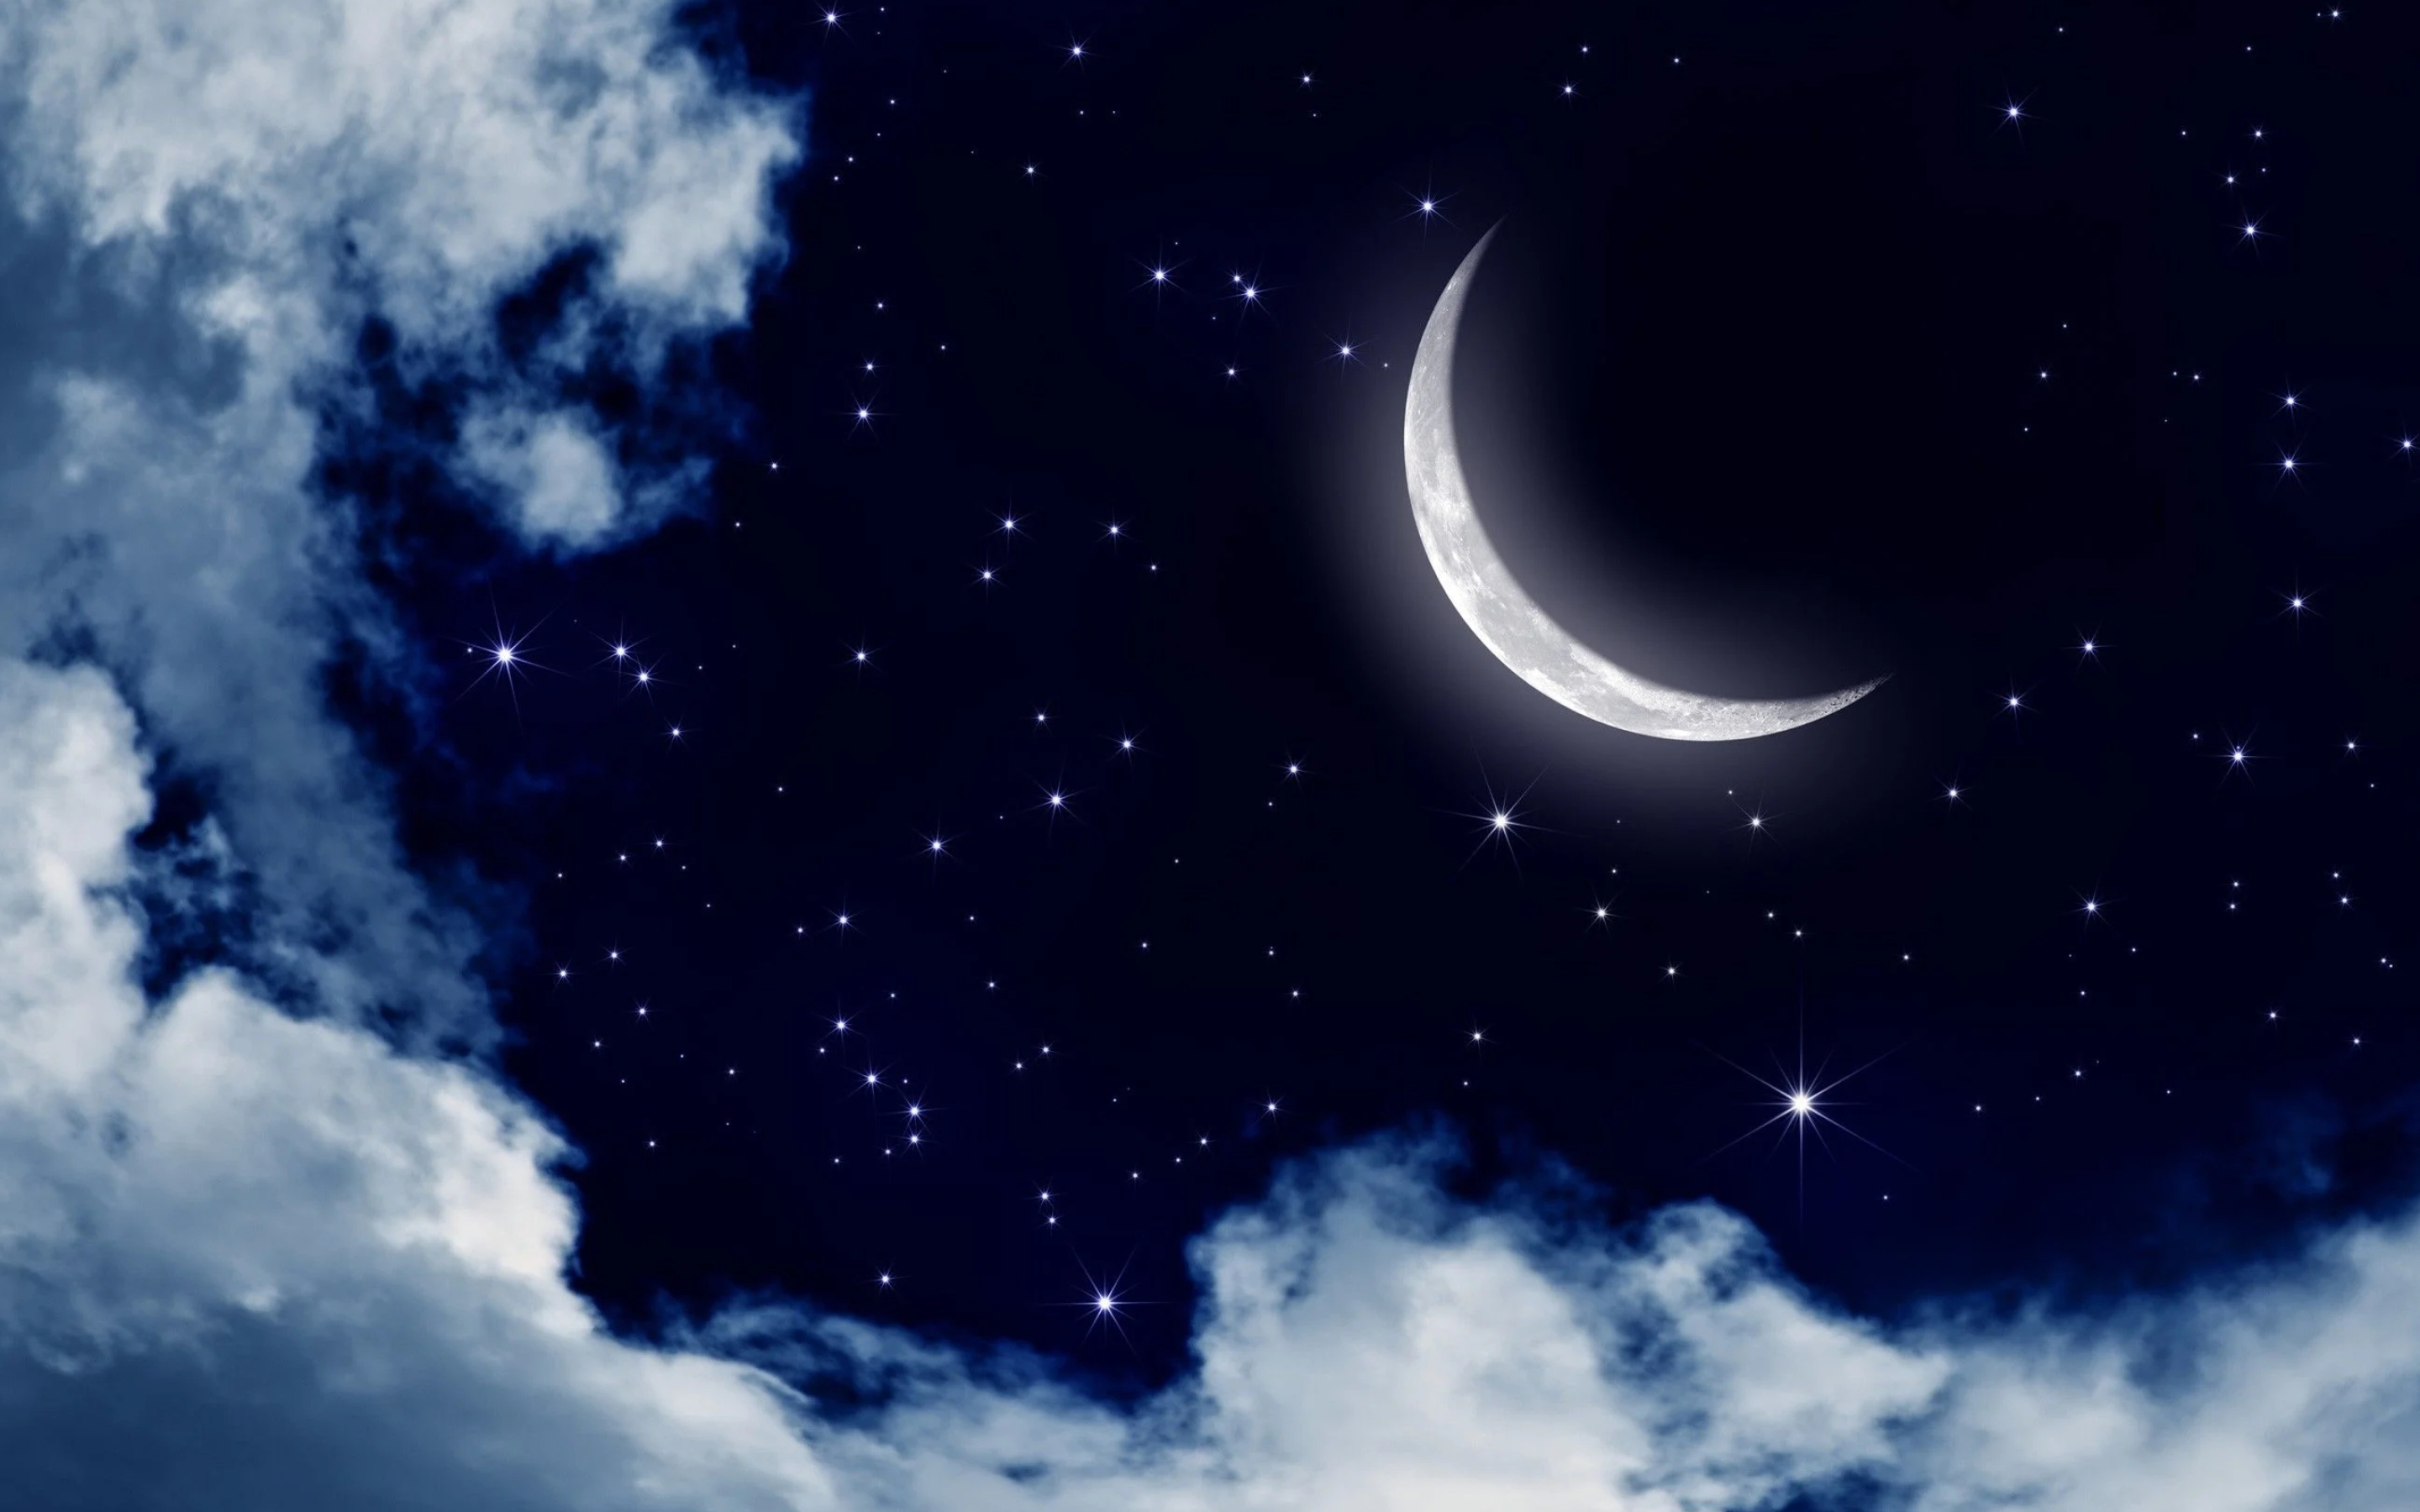 2880x1800 Stars and Moons Desktop Wallpapers Top Free Stars and Moons Desktop Backgrounds